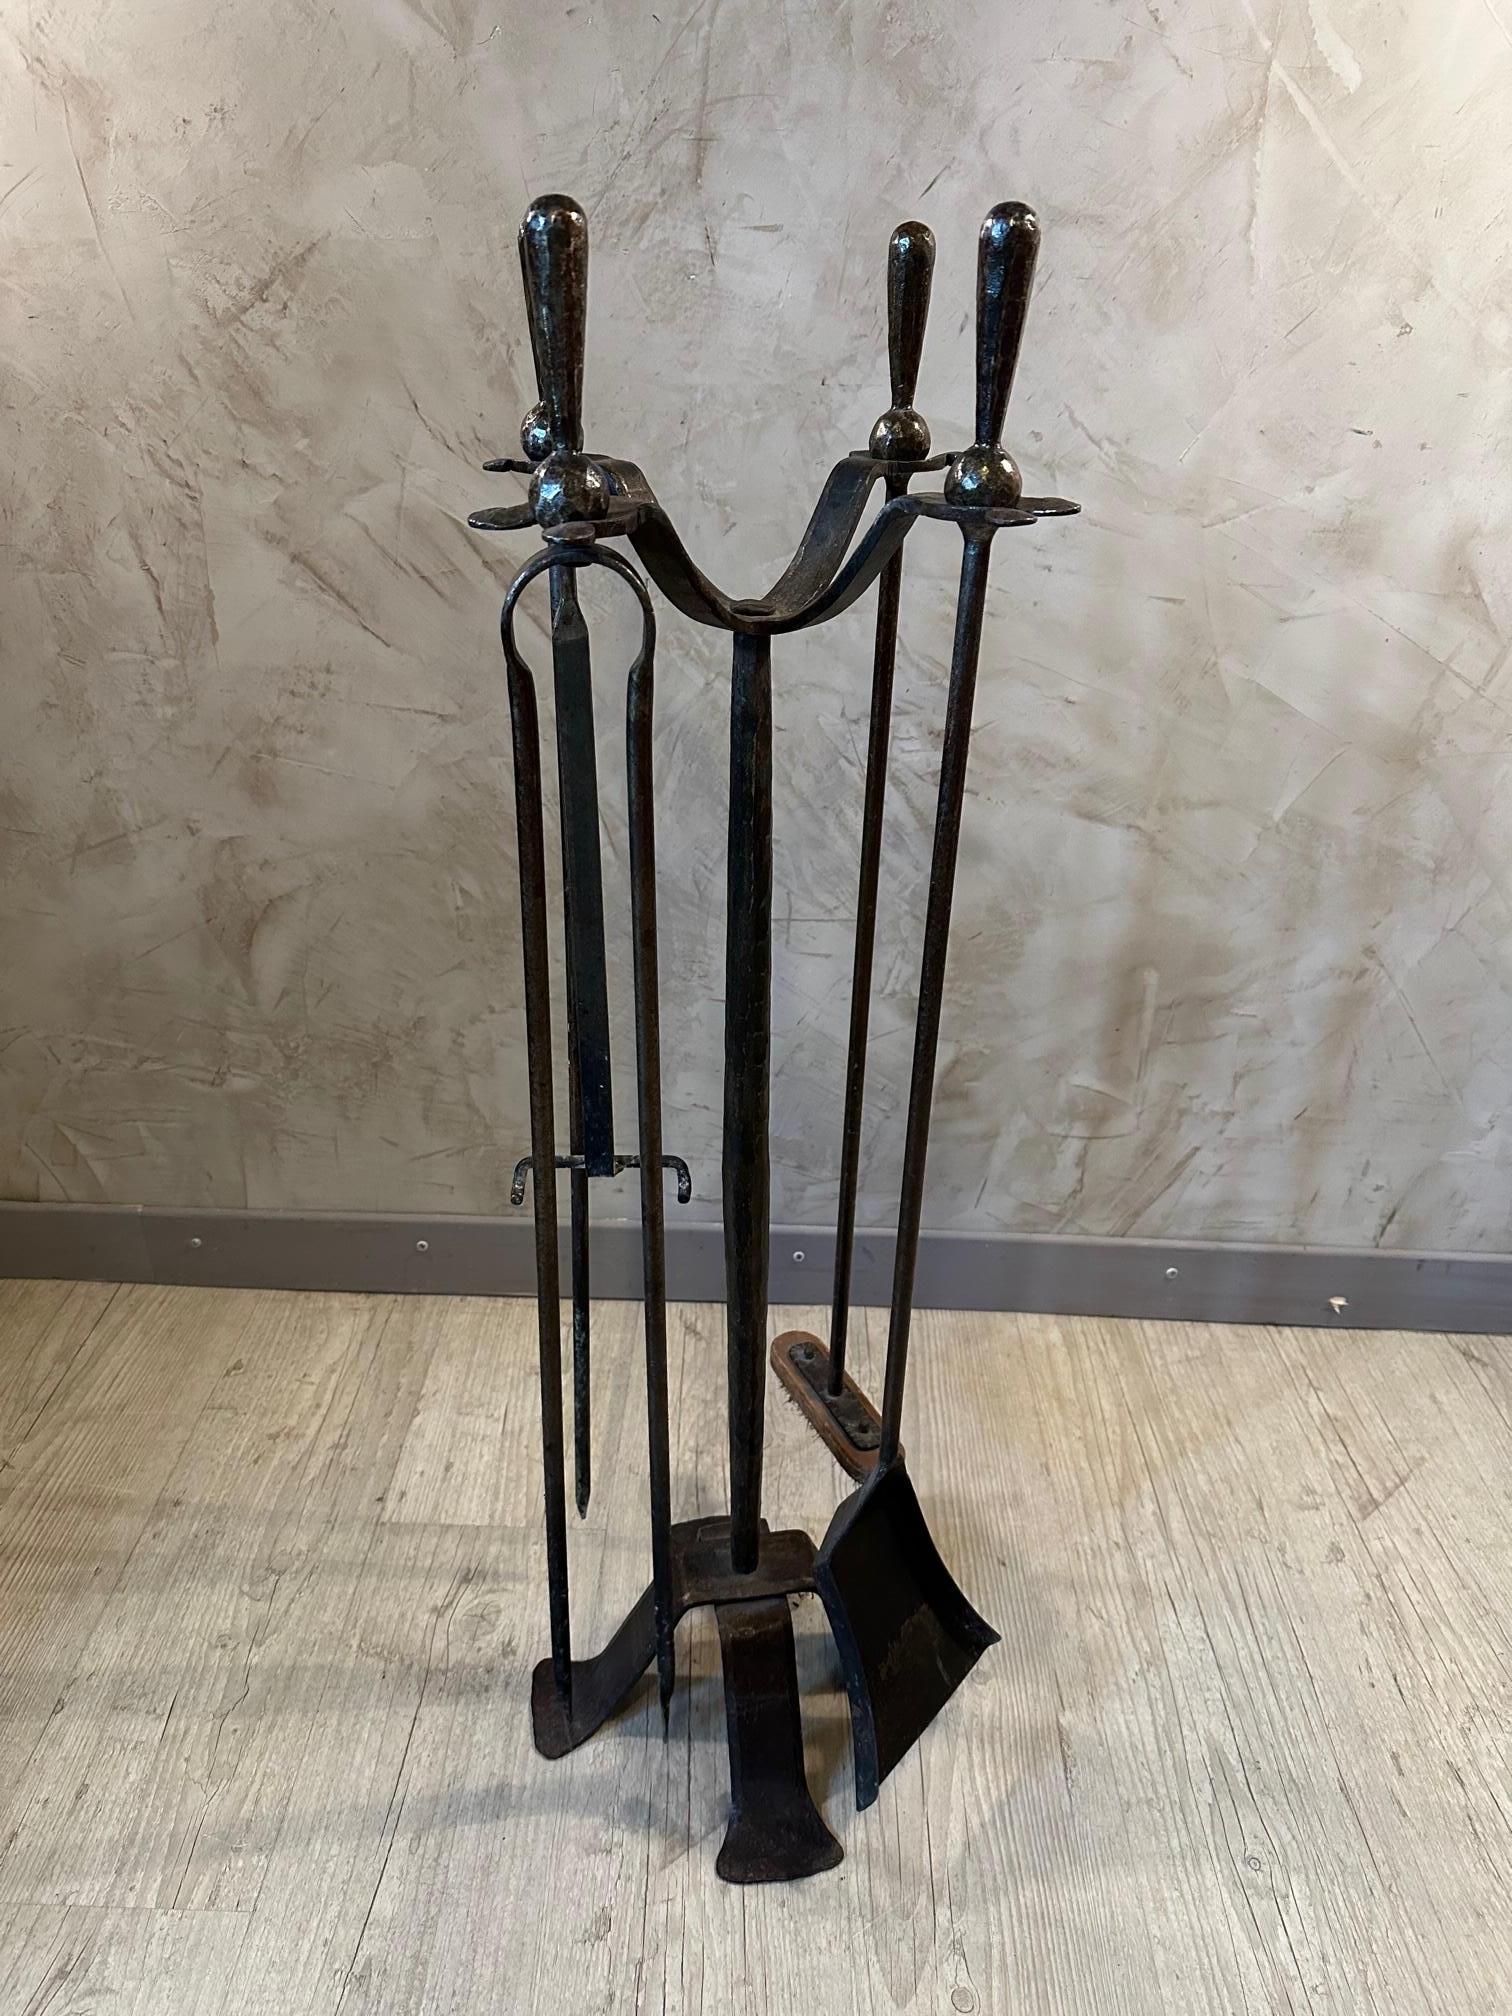 Very nice wrought iron fireplace set dating from the 1950s consisting of five tools for tending a fireplace fire.
Very beautiful blacksmith work, good quality. 
For lovers of handmade pieces.